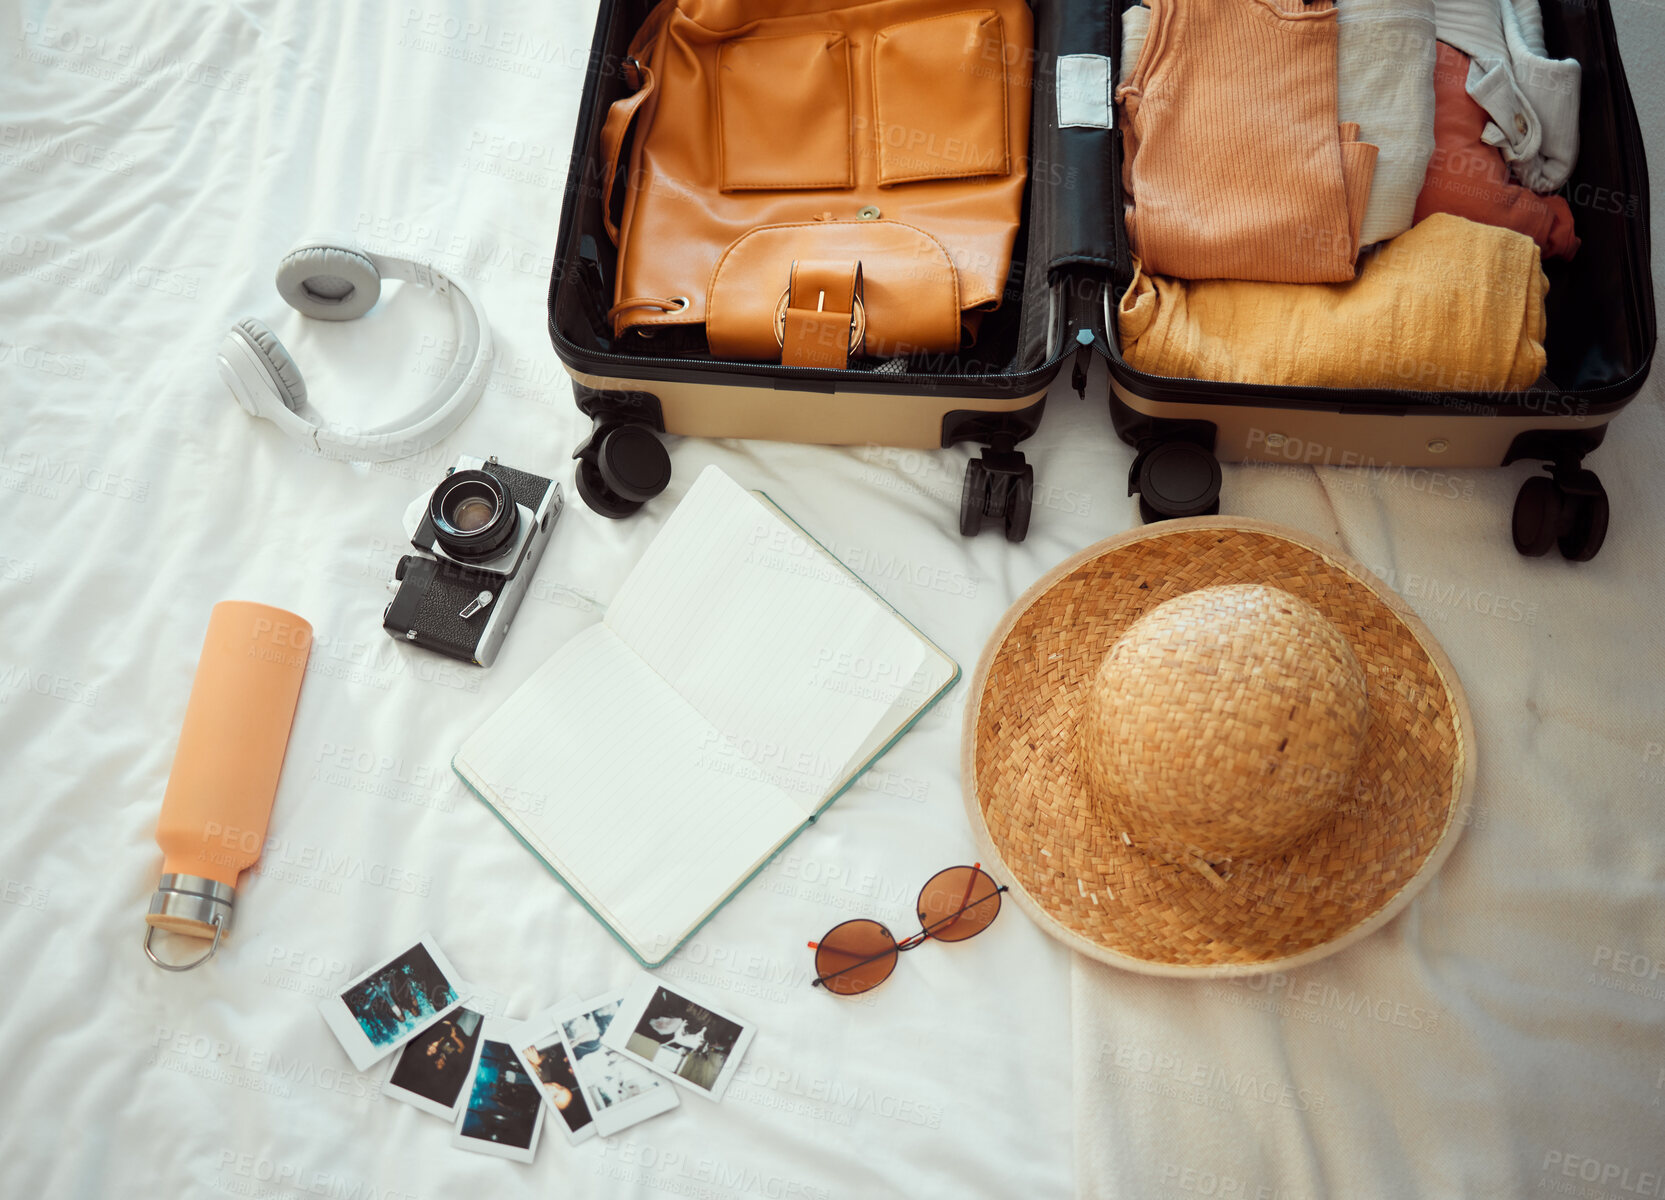 Buy stock photo Backpacking, suitcase and equipment for summer travel, vacation or holiday getaway kit preparation on bed. Tourism, packing and items for traveler, trip or tourist adventure, explorer gear in bedroom